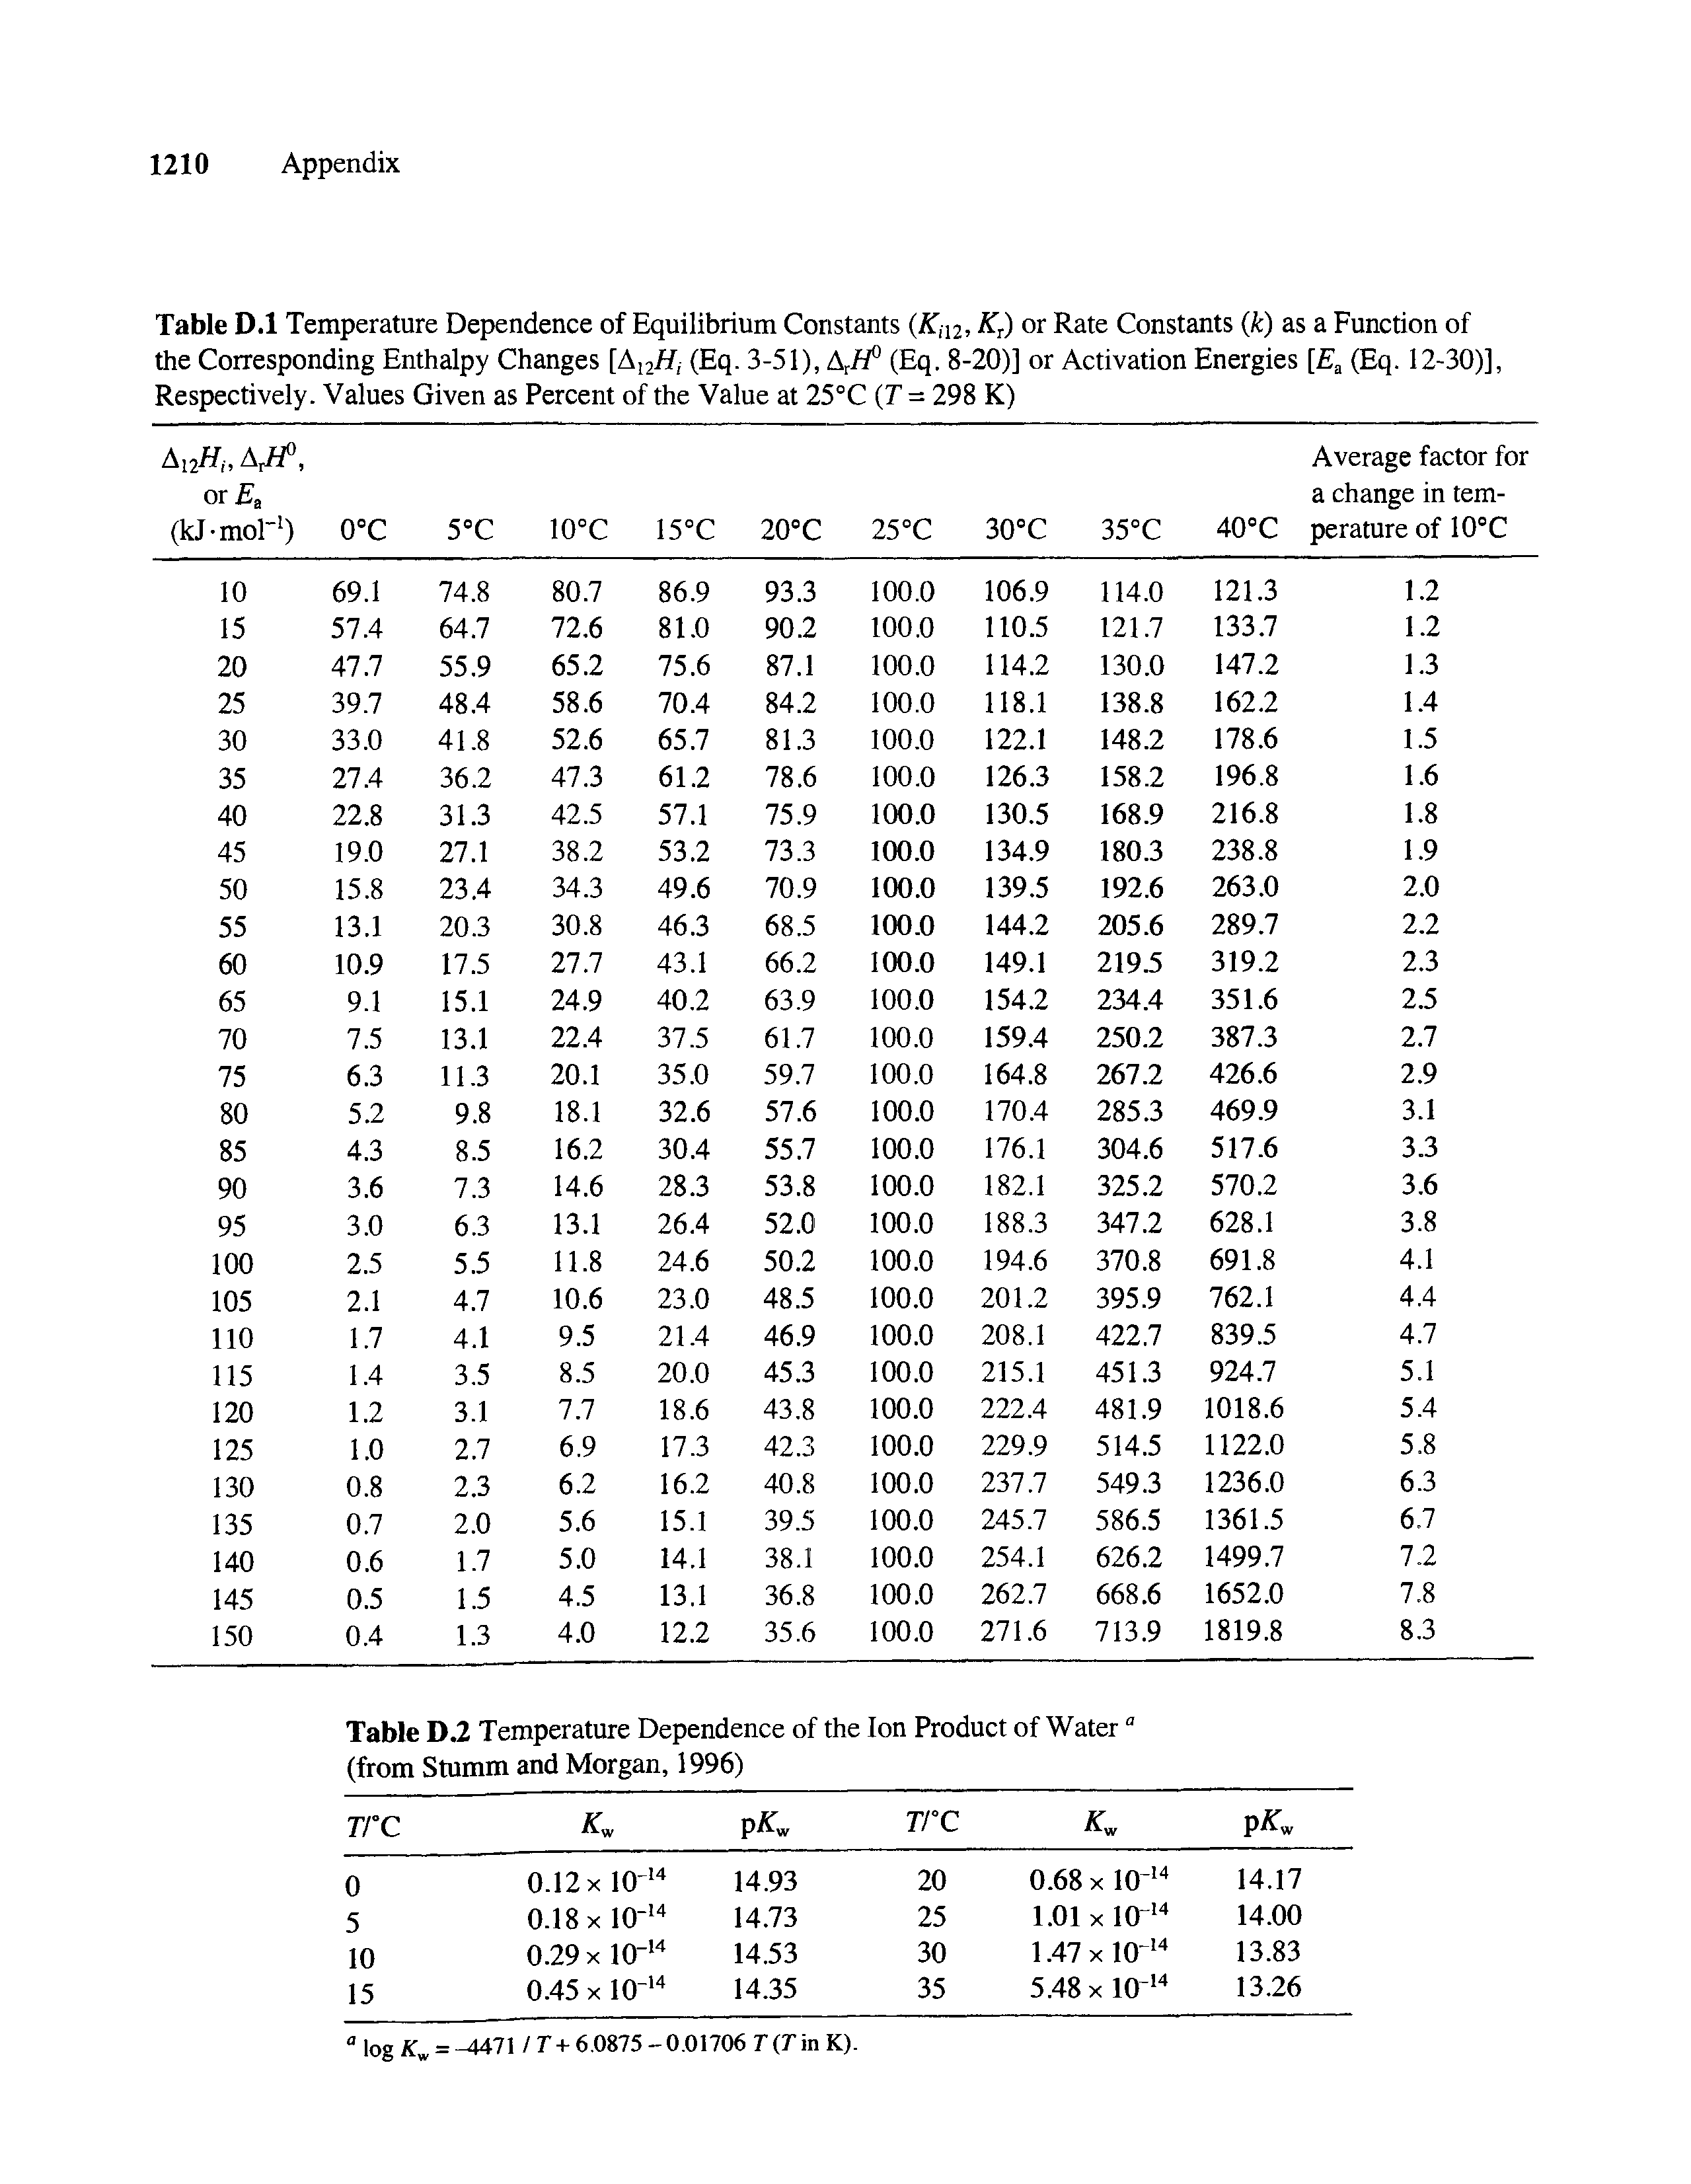 Table D.l Temperature Dependence of Equilibrium Constants Km, K ) or Rate Constants (k) as a Function of the Corresponding Enthalpy Changes [AI277, (Eq. 3-51), Ar//° (Eq. 8-20)] or Activation Energies [ a (Eq. 12-30)], Respectively. Values Given as Percent of the Value at 25°C (T = 298 K)...